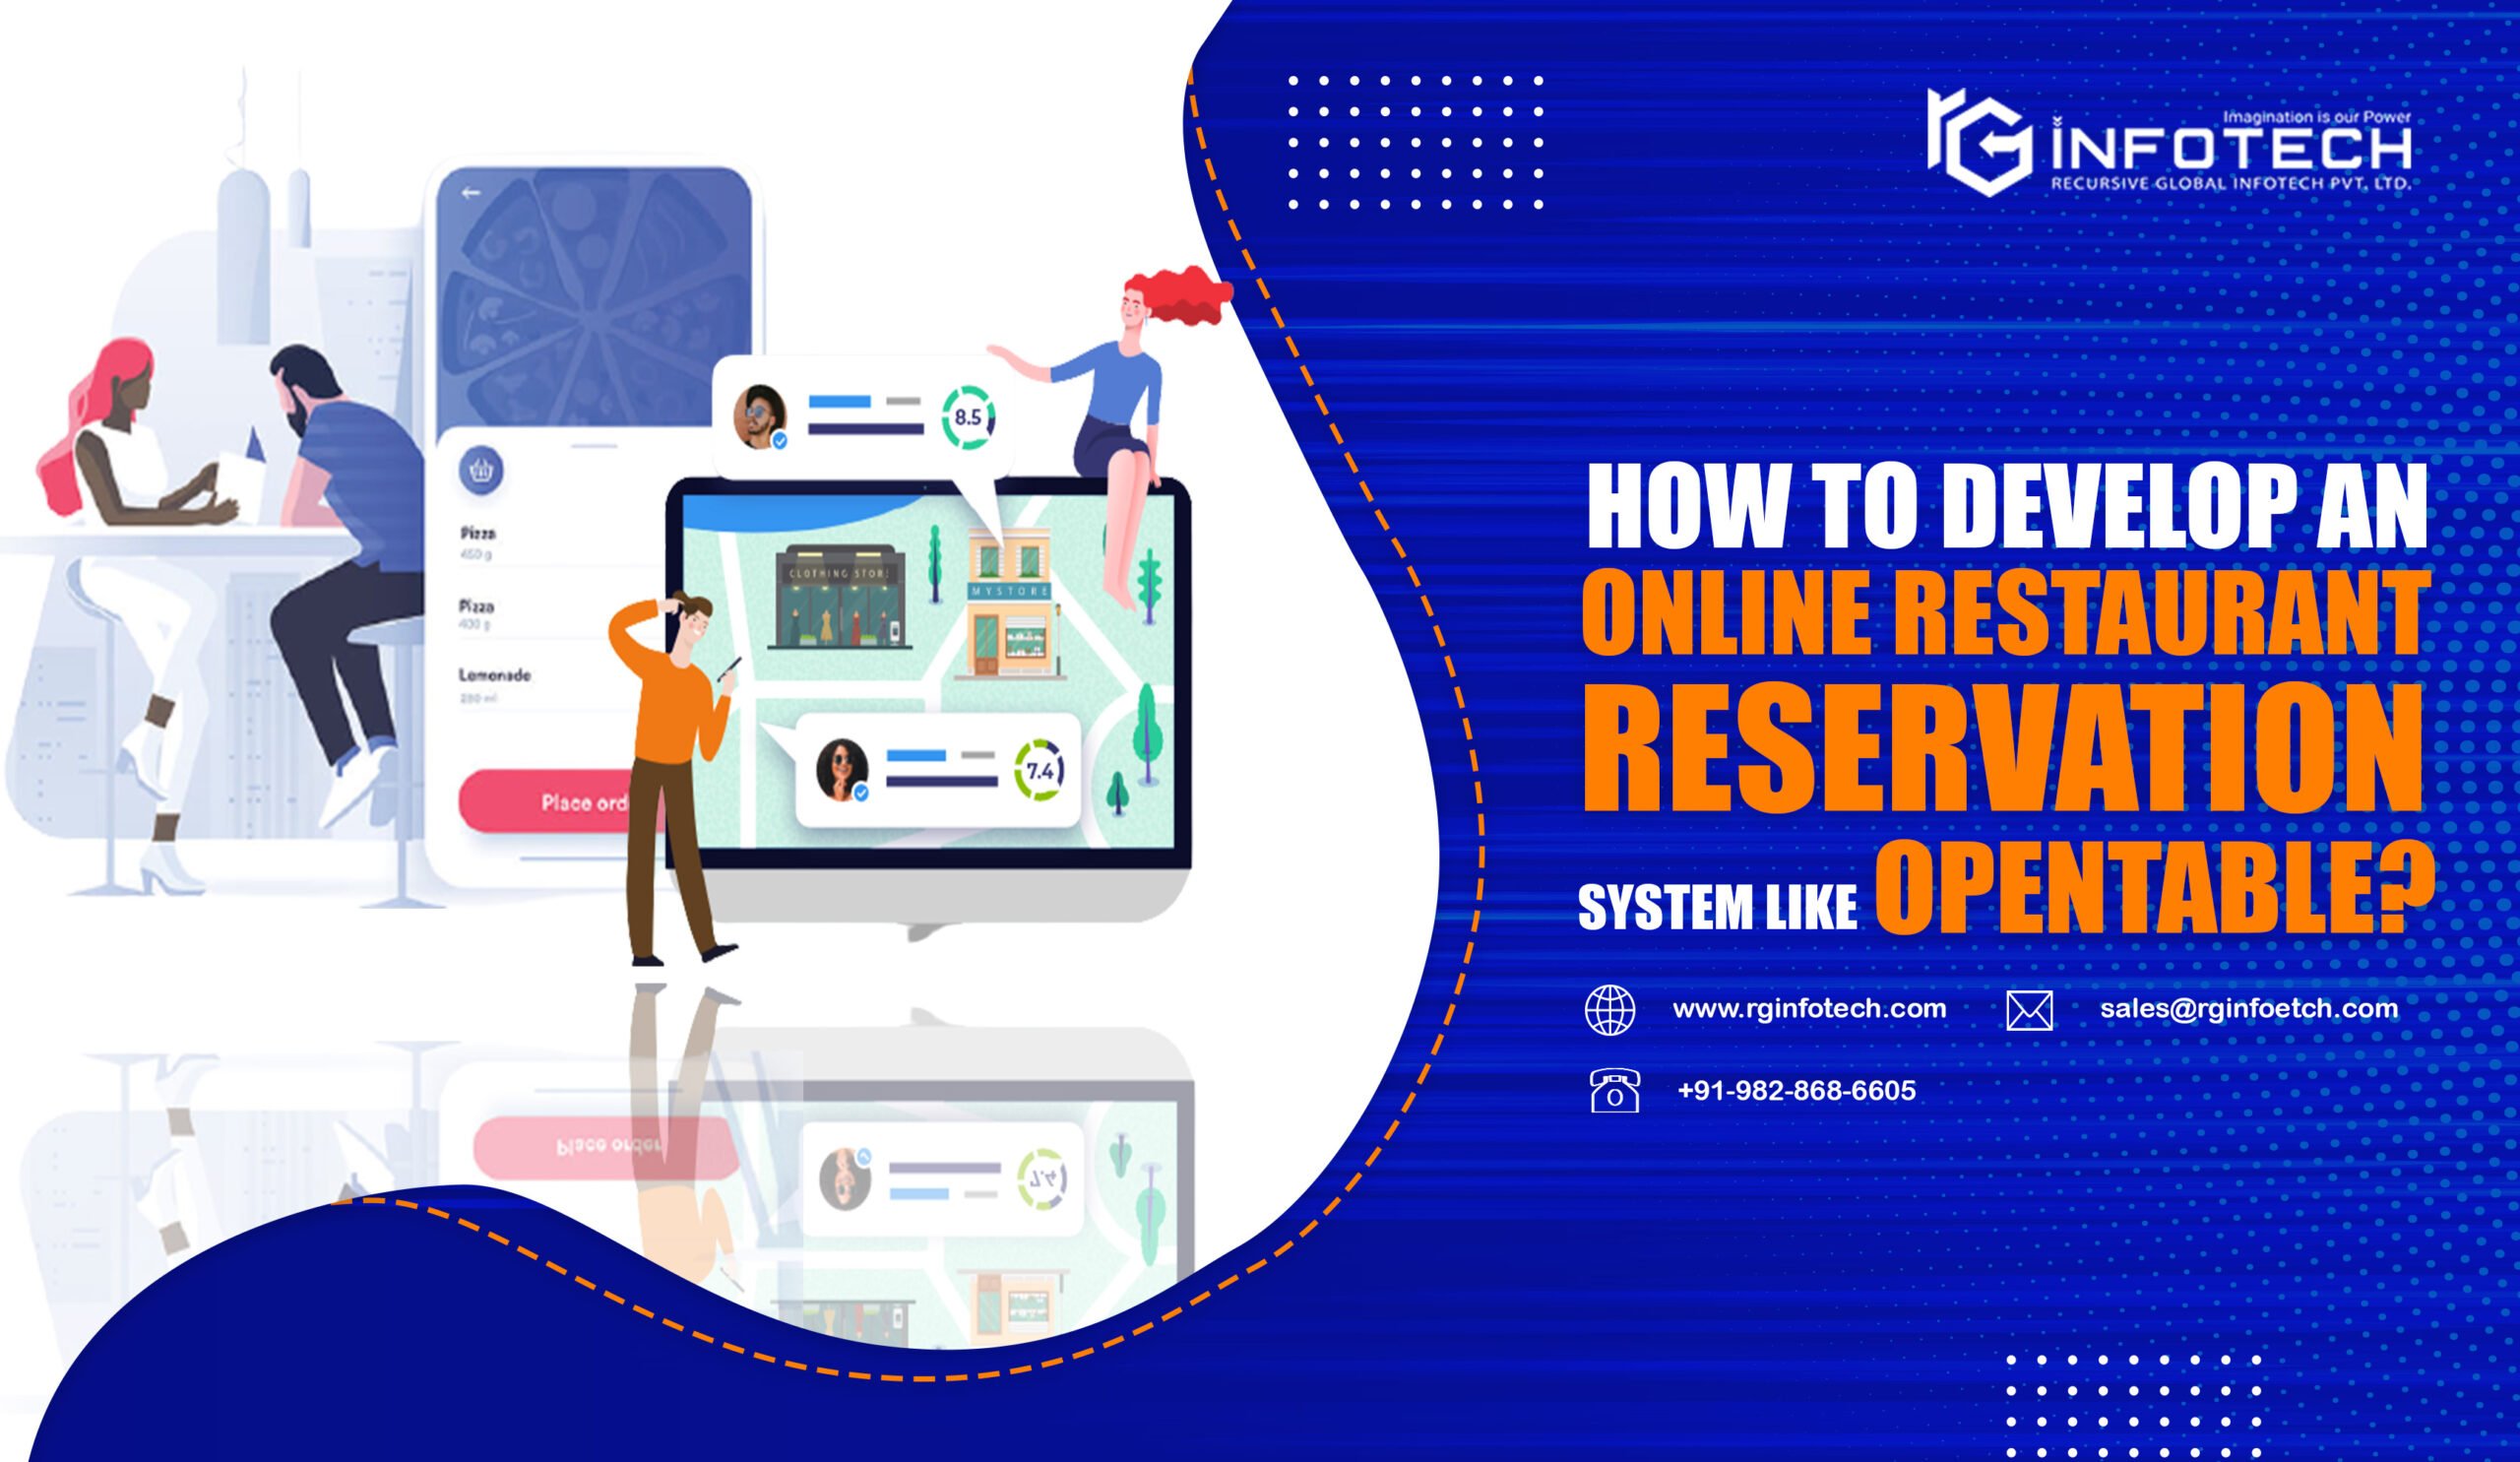 Blog_How to develop an online restaurant reservation system like OpenTable.docx